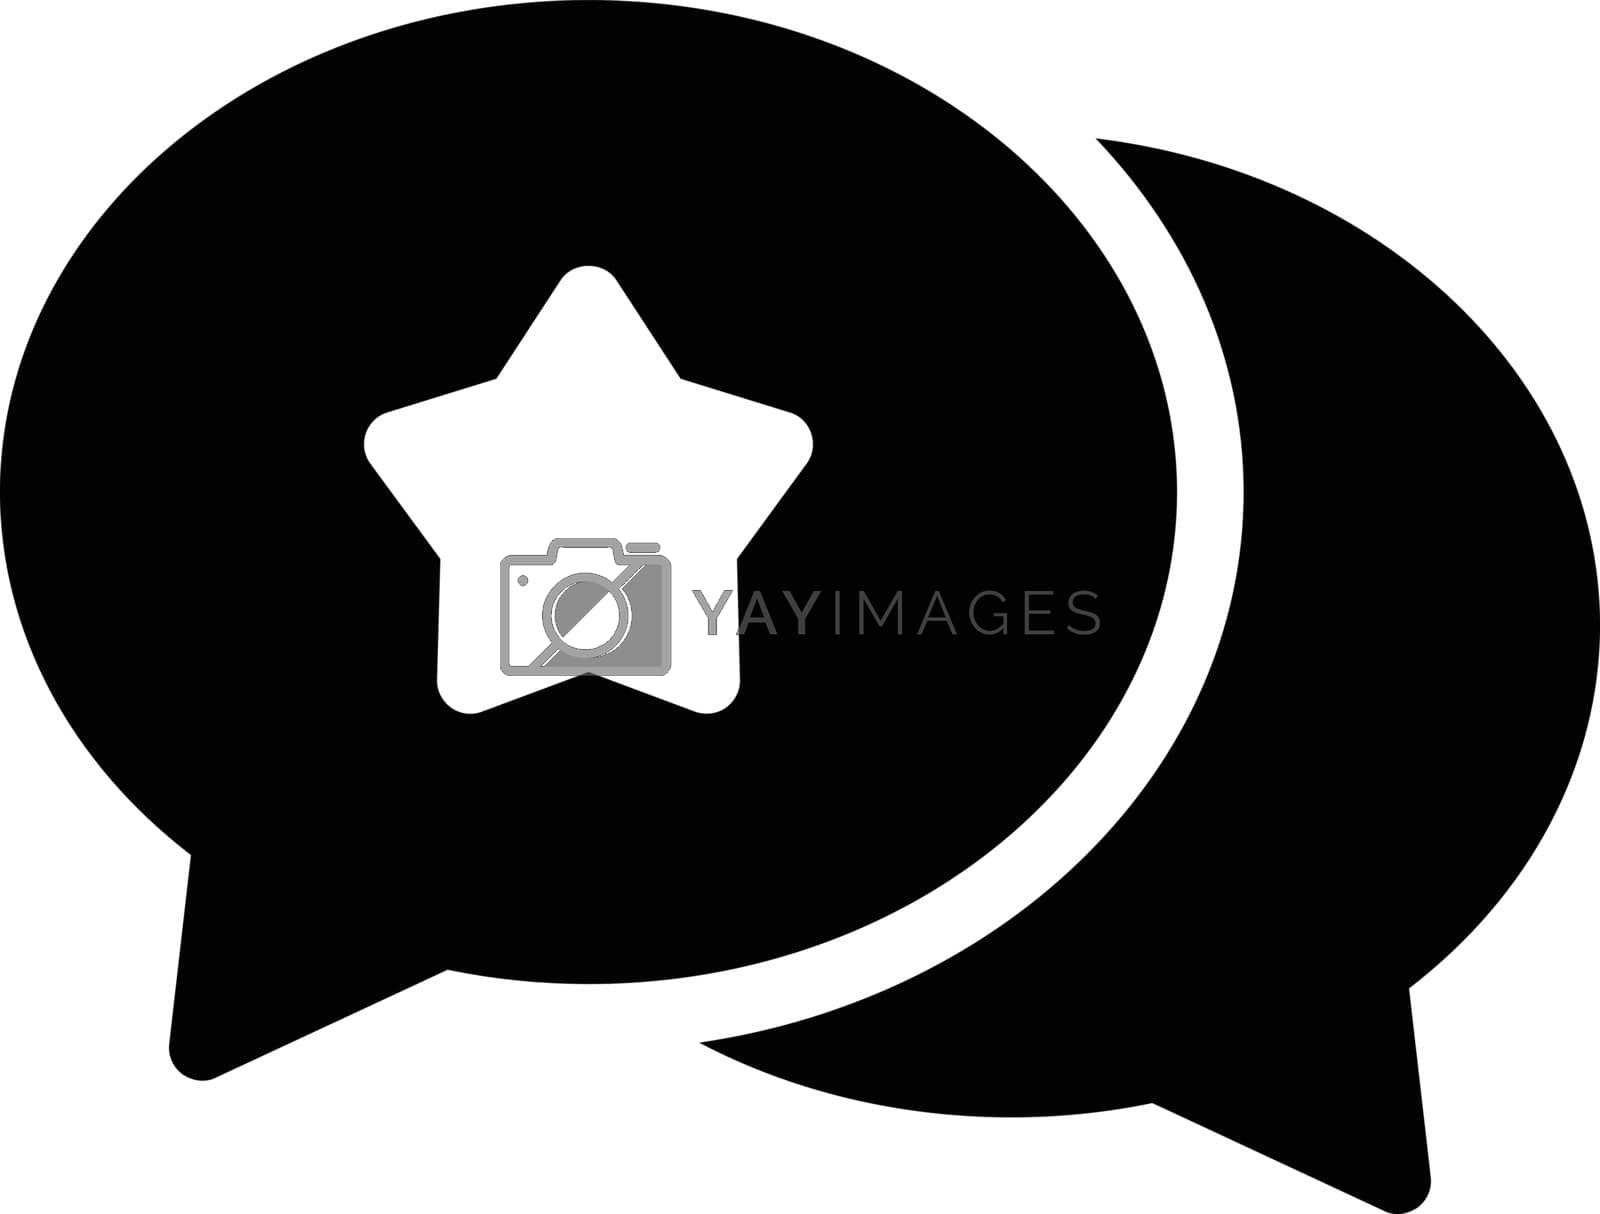 Royalty free image of star by vectorstall